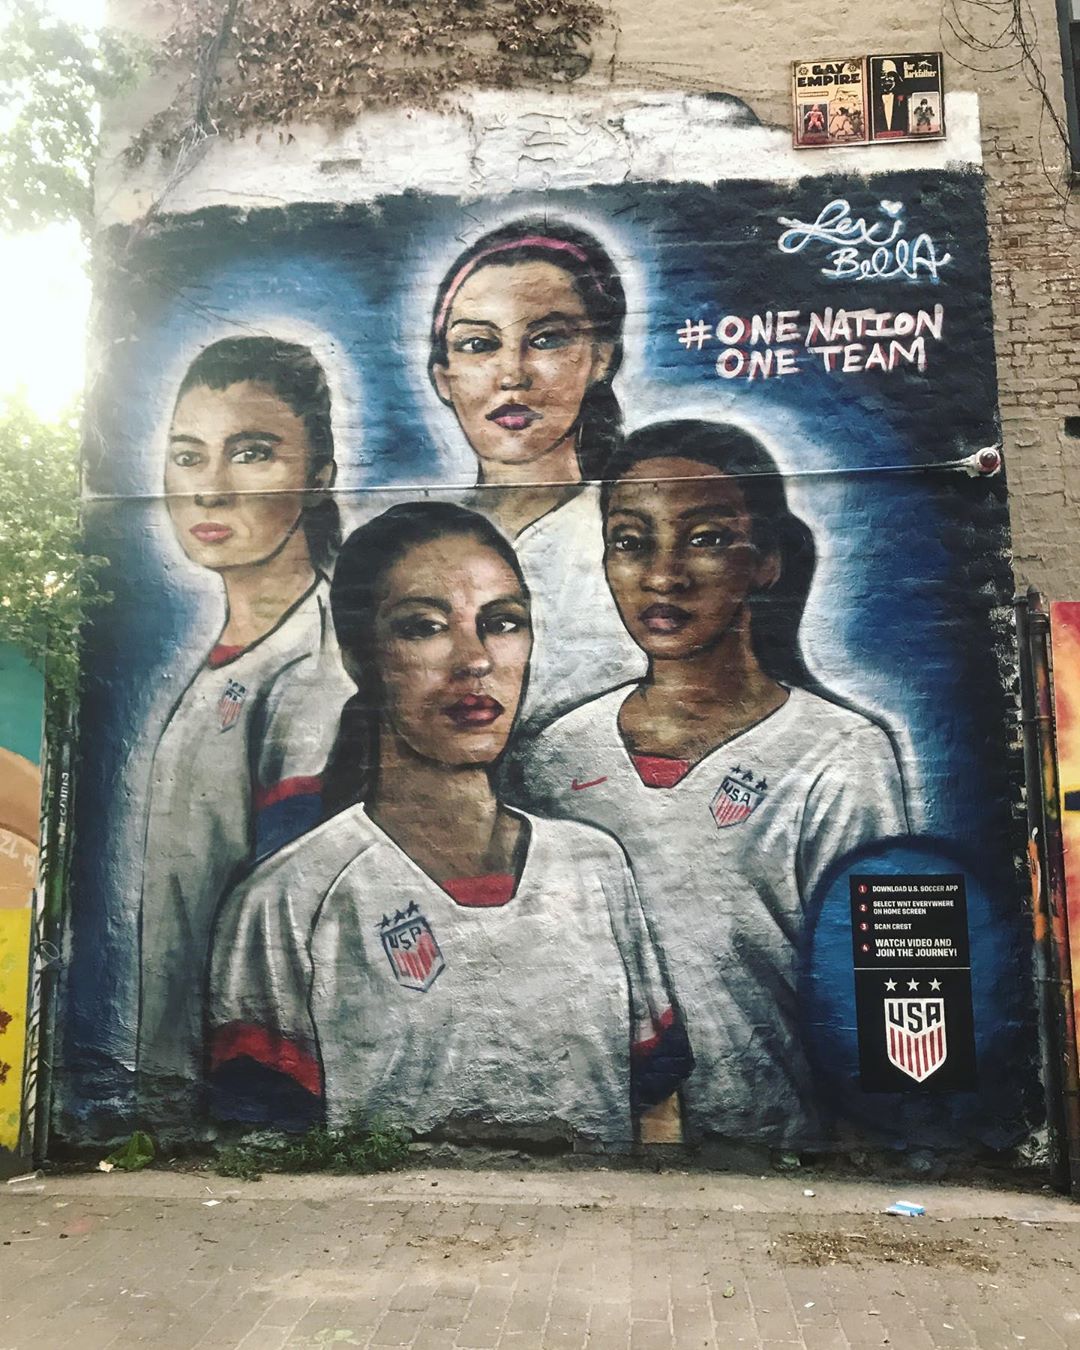 mural in New York by artist Lexi Bella. Tagged: soccer, sports, USWNT